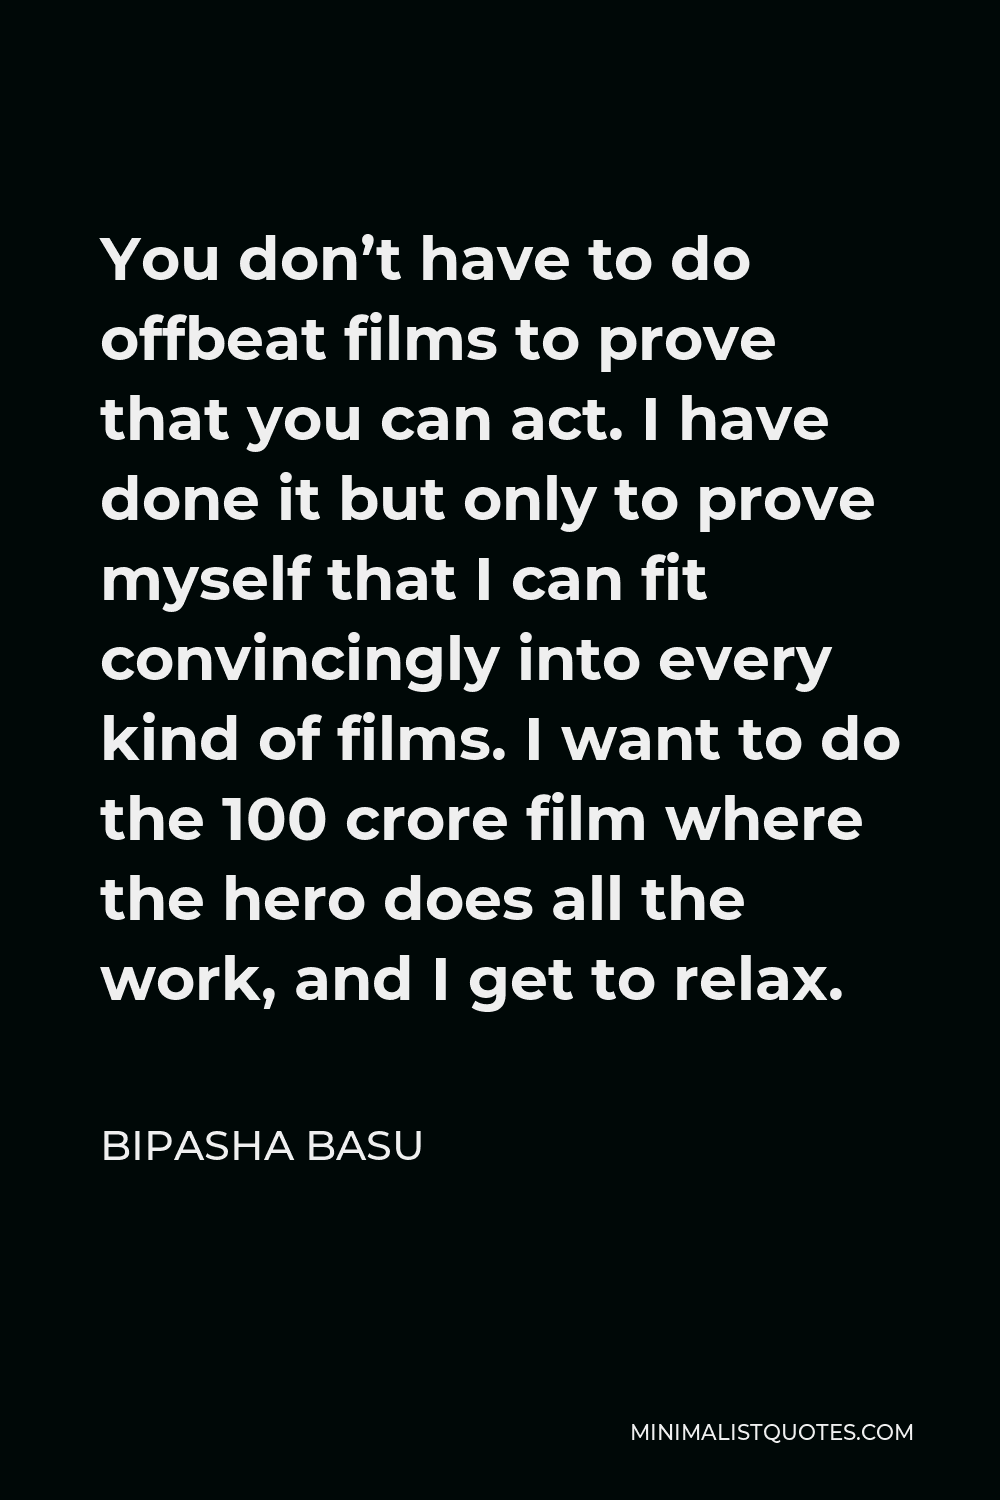 Bipasha Basu Quote - You don’t have to do offbeat films to prove that you can act. I have done it but only to prove myself that I can fit convincingly into every kind of films. I want to do the 100 crore film where the hero does all the work, and I get to relax.